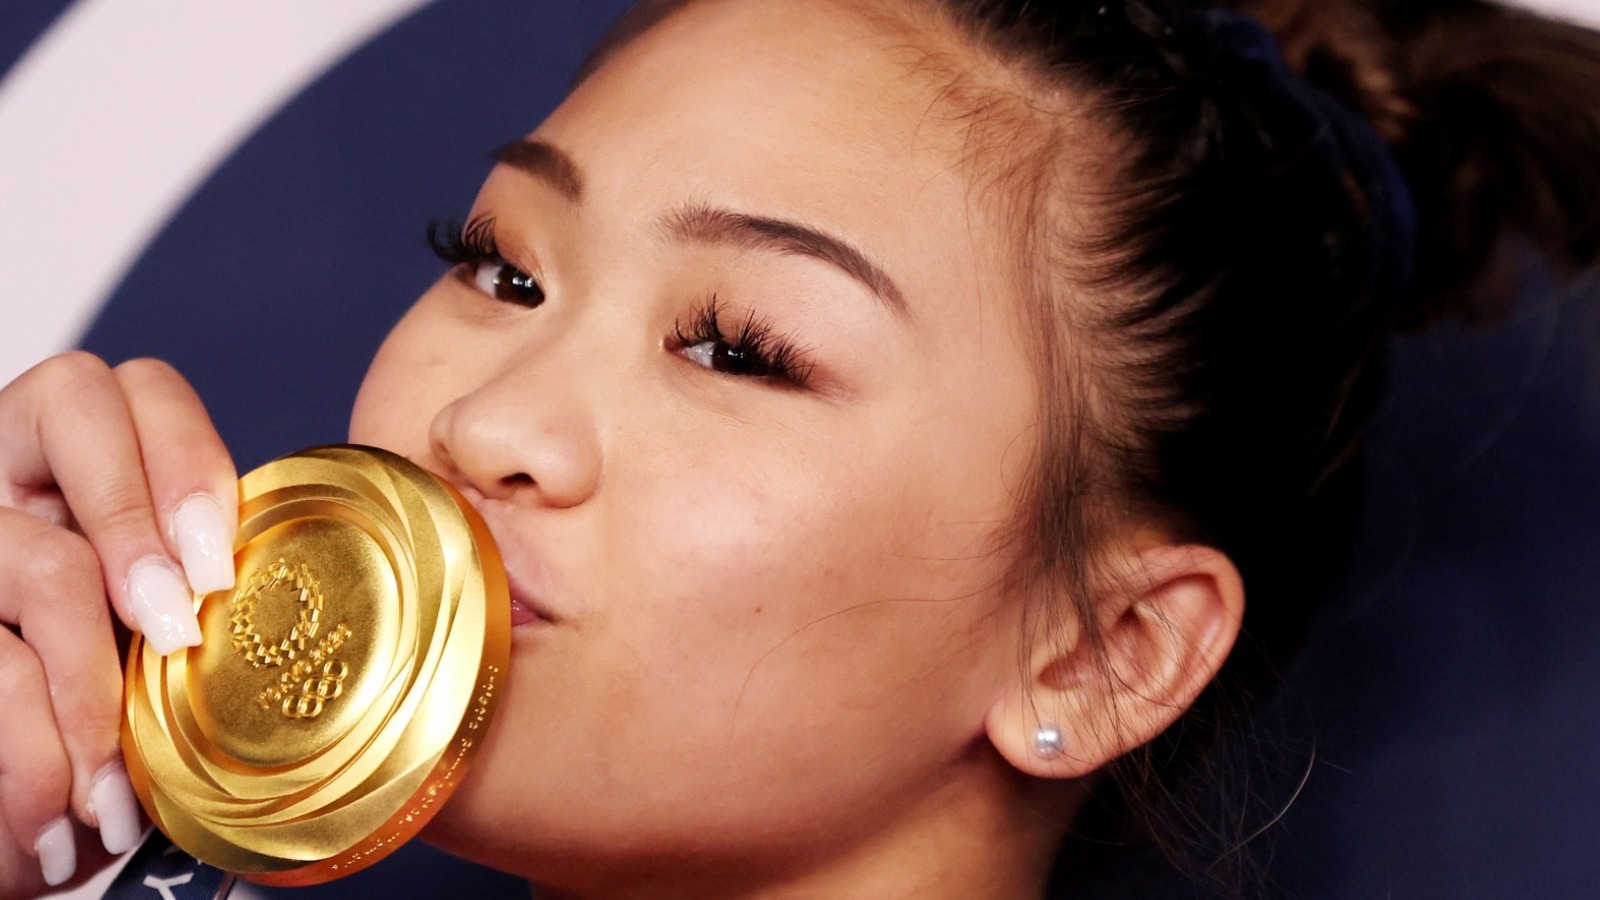 Why Gymnast Suni Lee's Gold Medal Win Has Twitter Talking